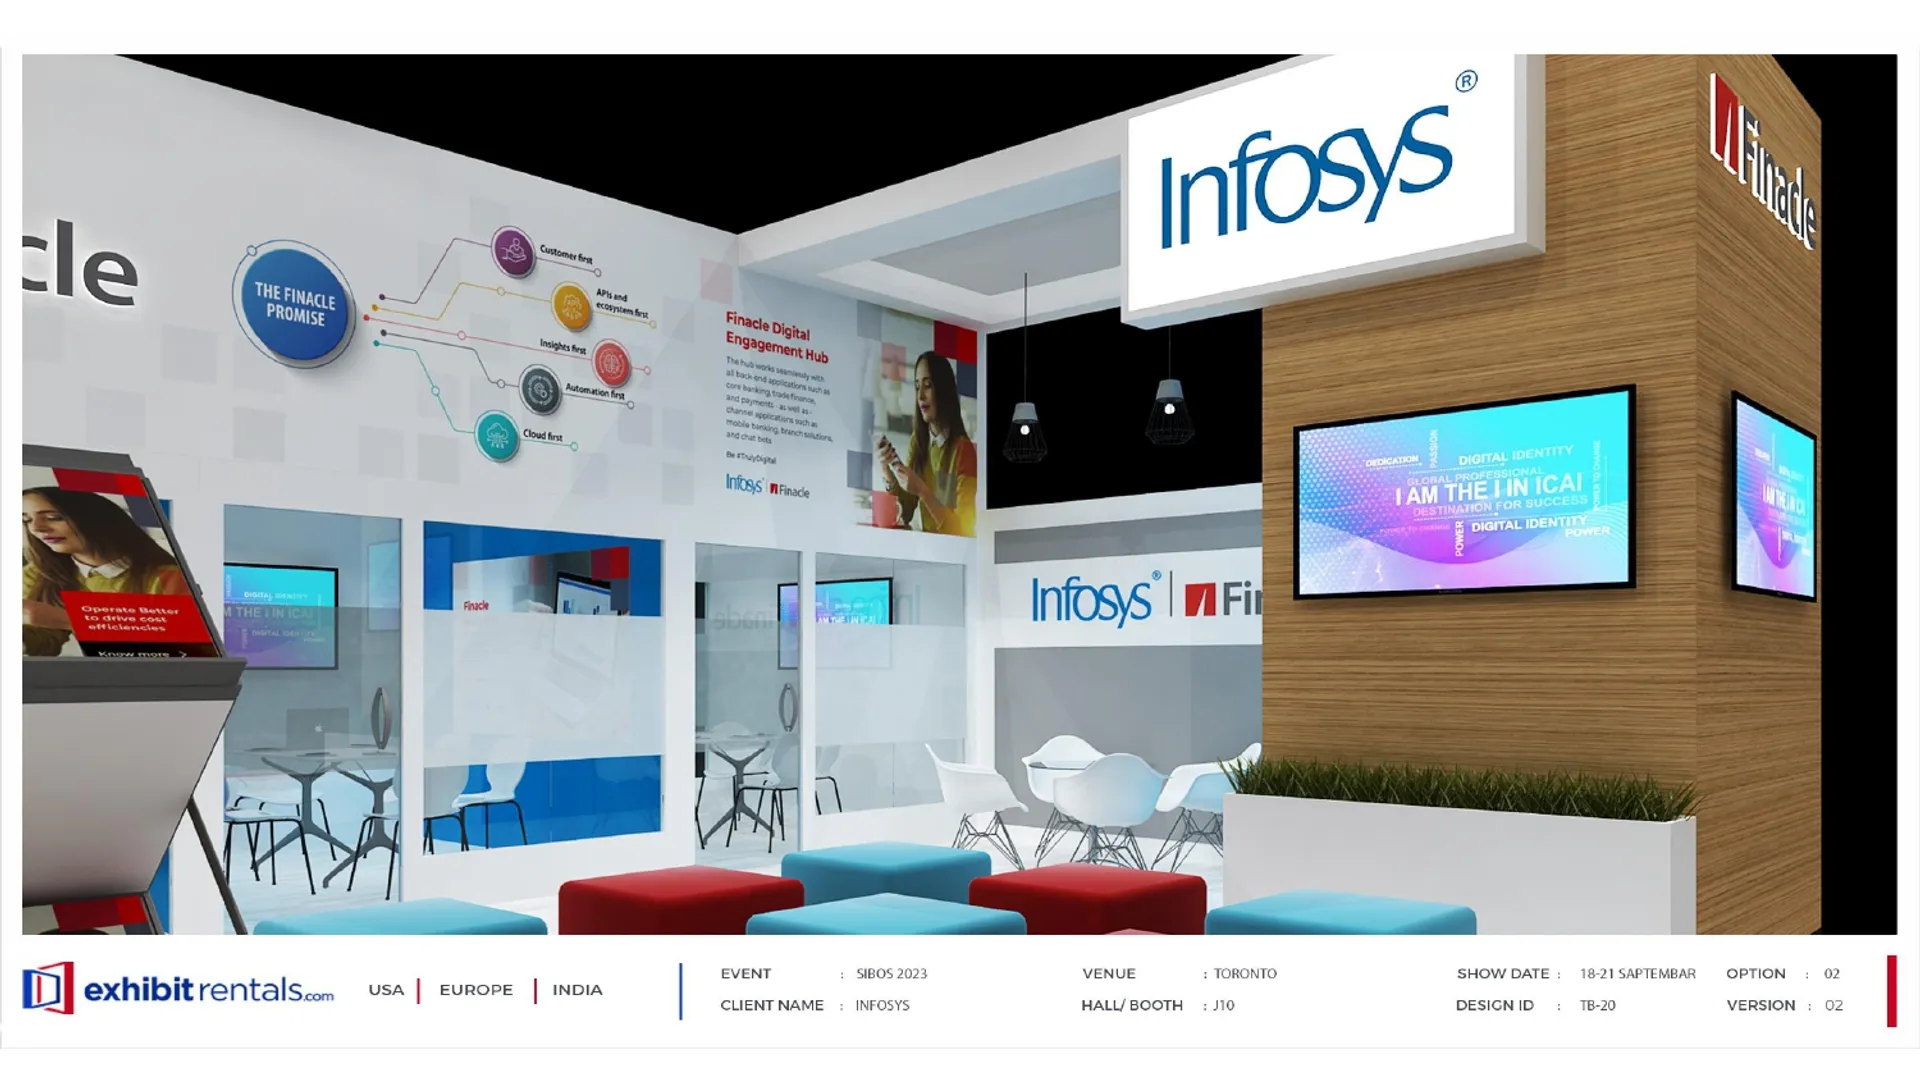 booth-design-projects/Exhibit-Rentals/2024-04-17-30x40-PENINSULA-Project-98/2.2 - Infosys - ER Design Presentation.pptx-20_page-0001-2zqsw.jpg